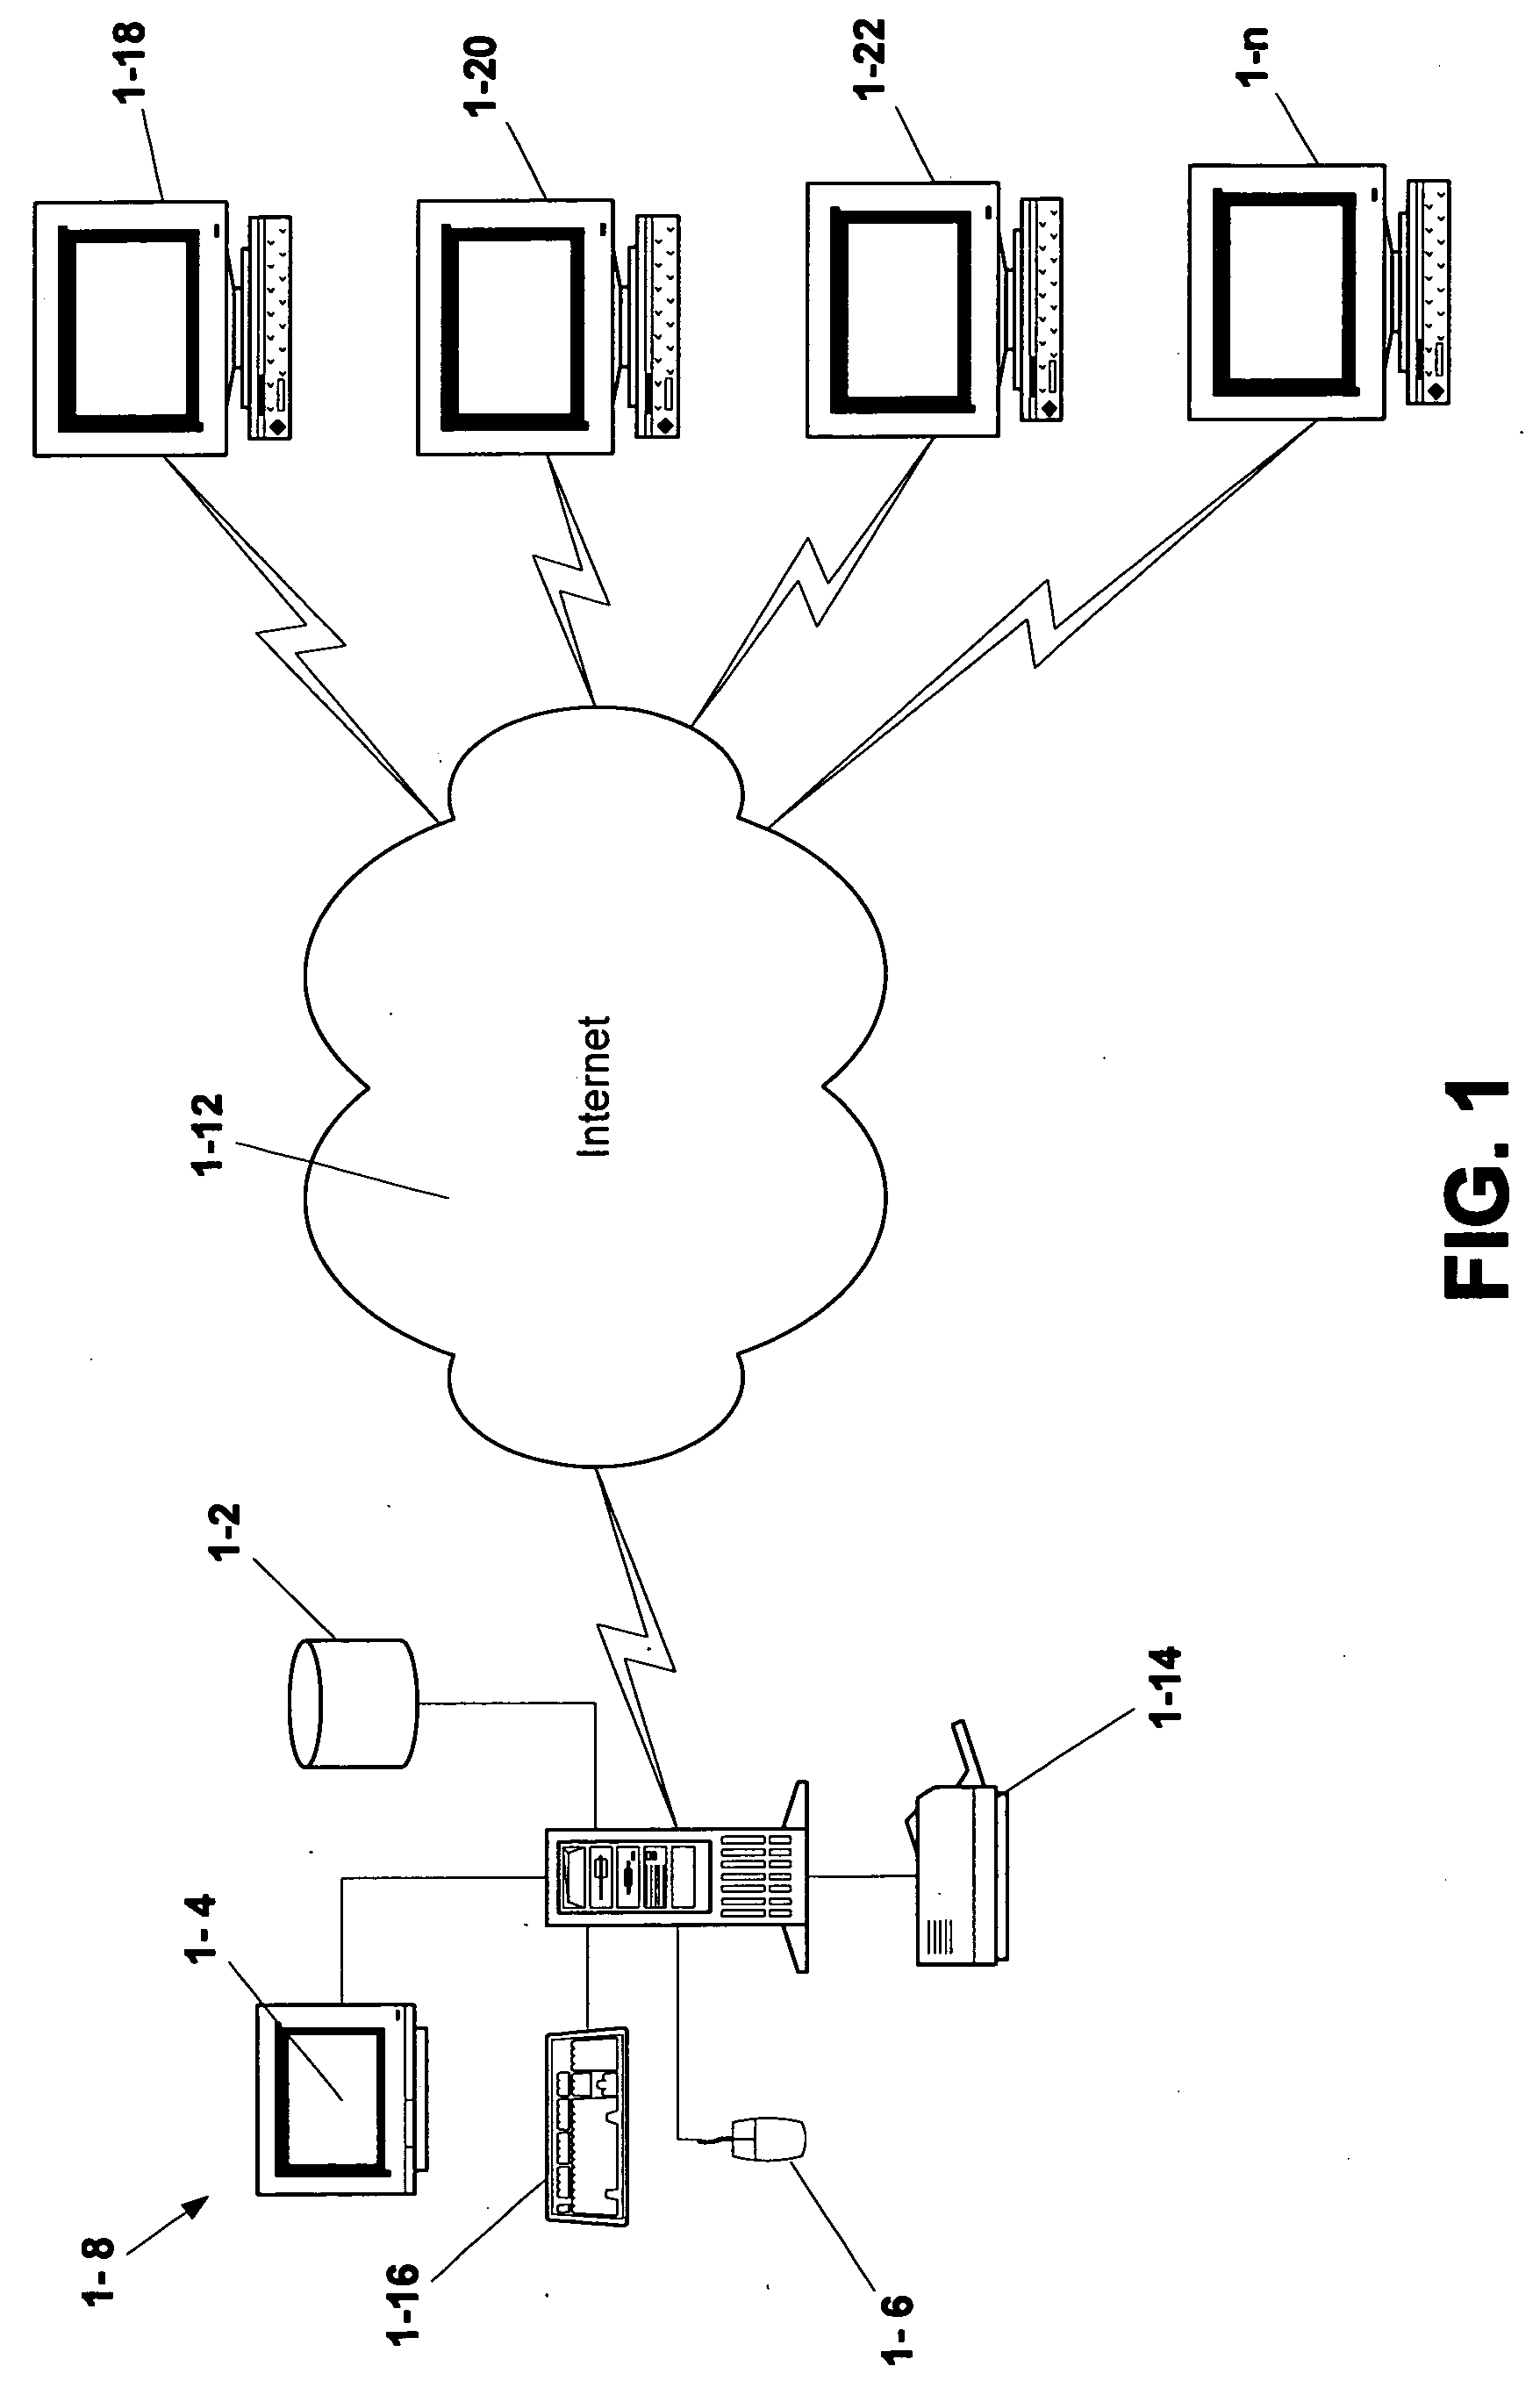 Content management system for creating and maintaining a database of information utilizing user experiences